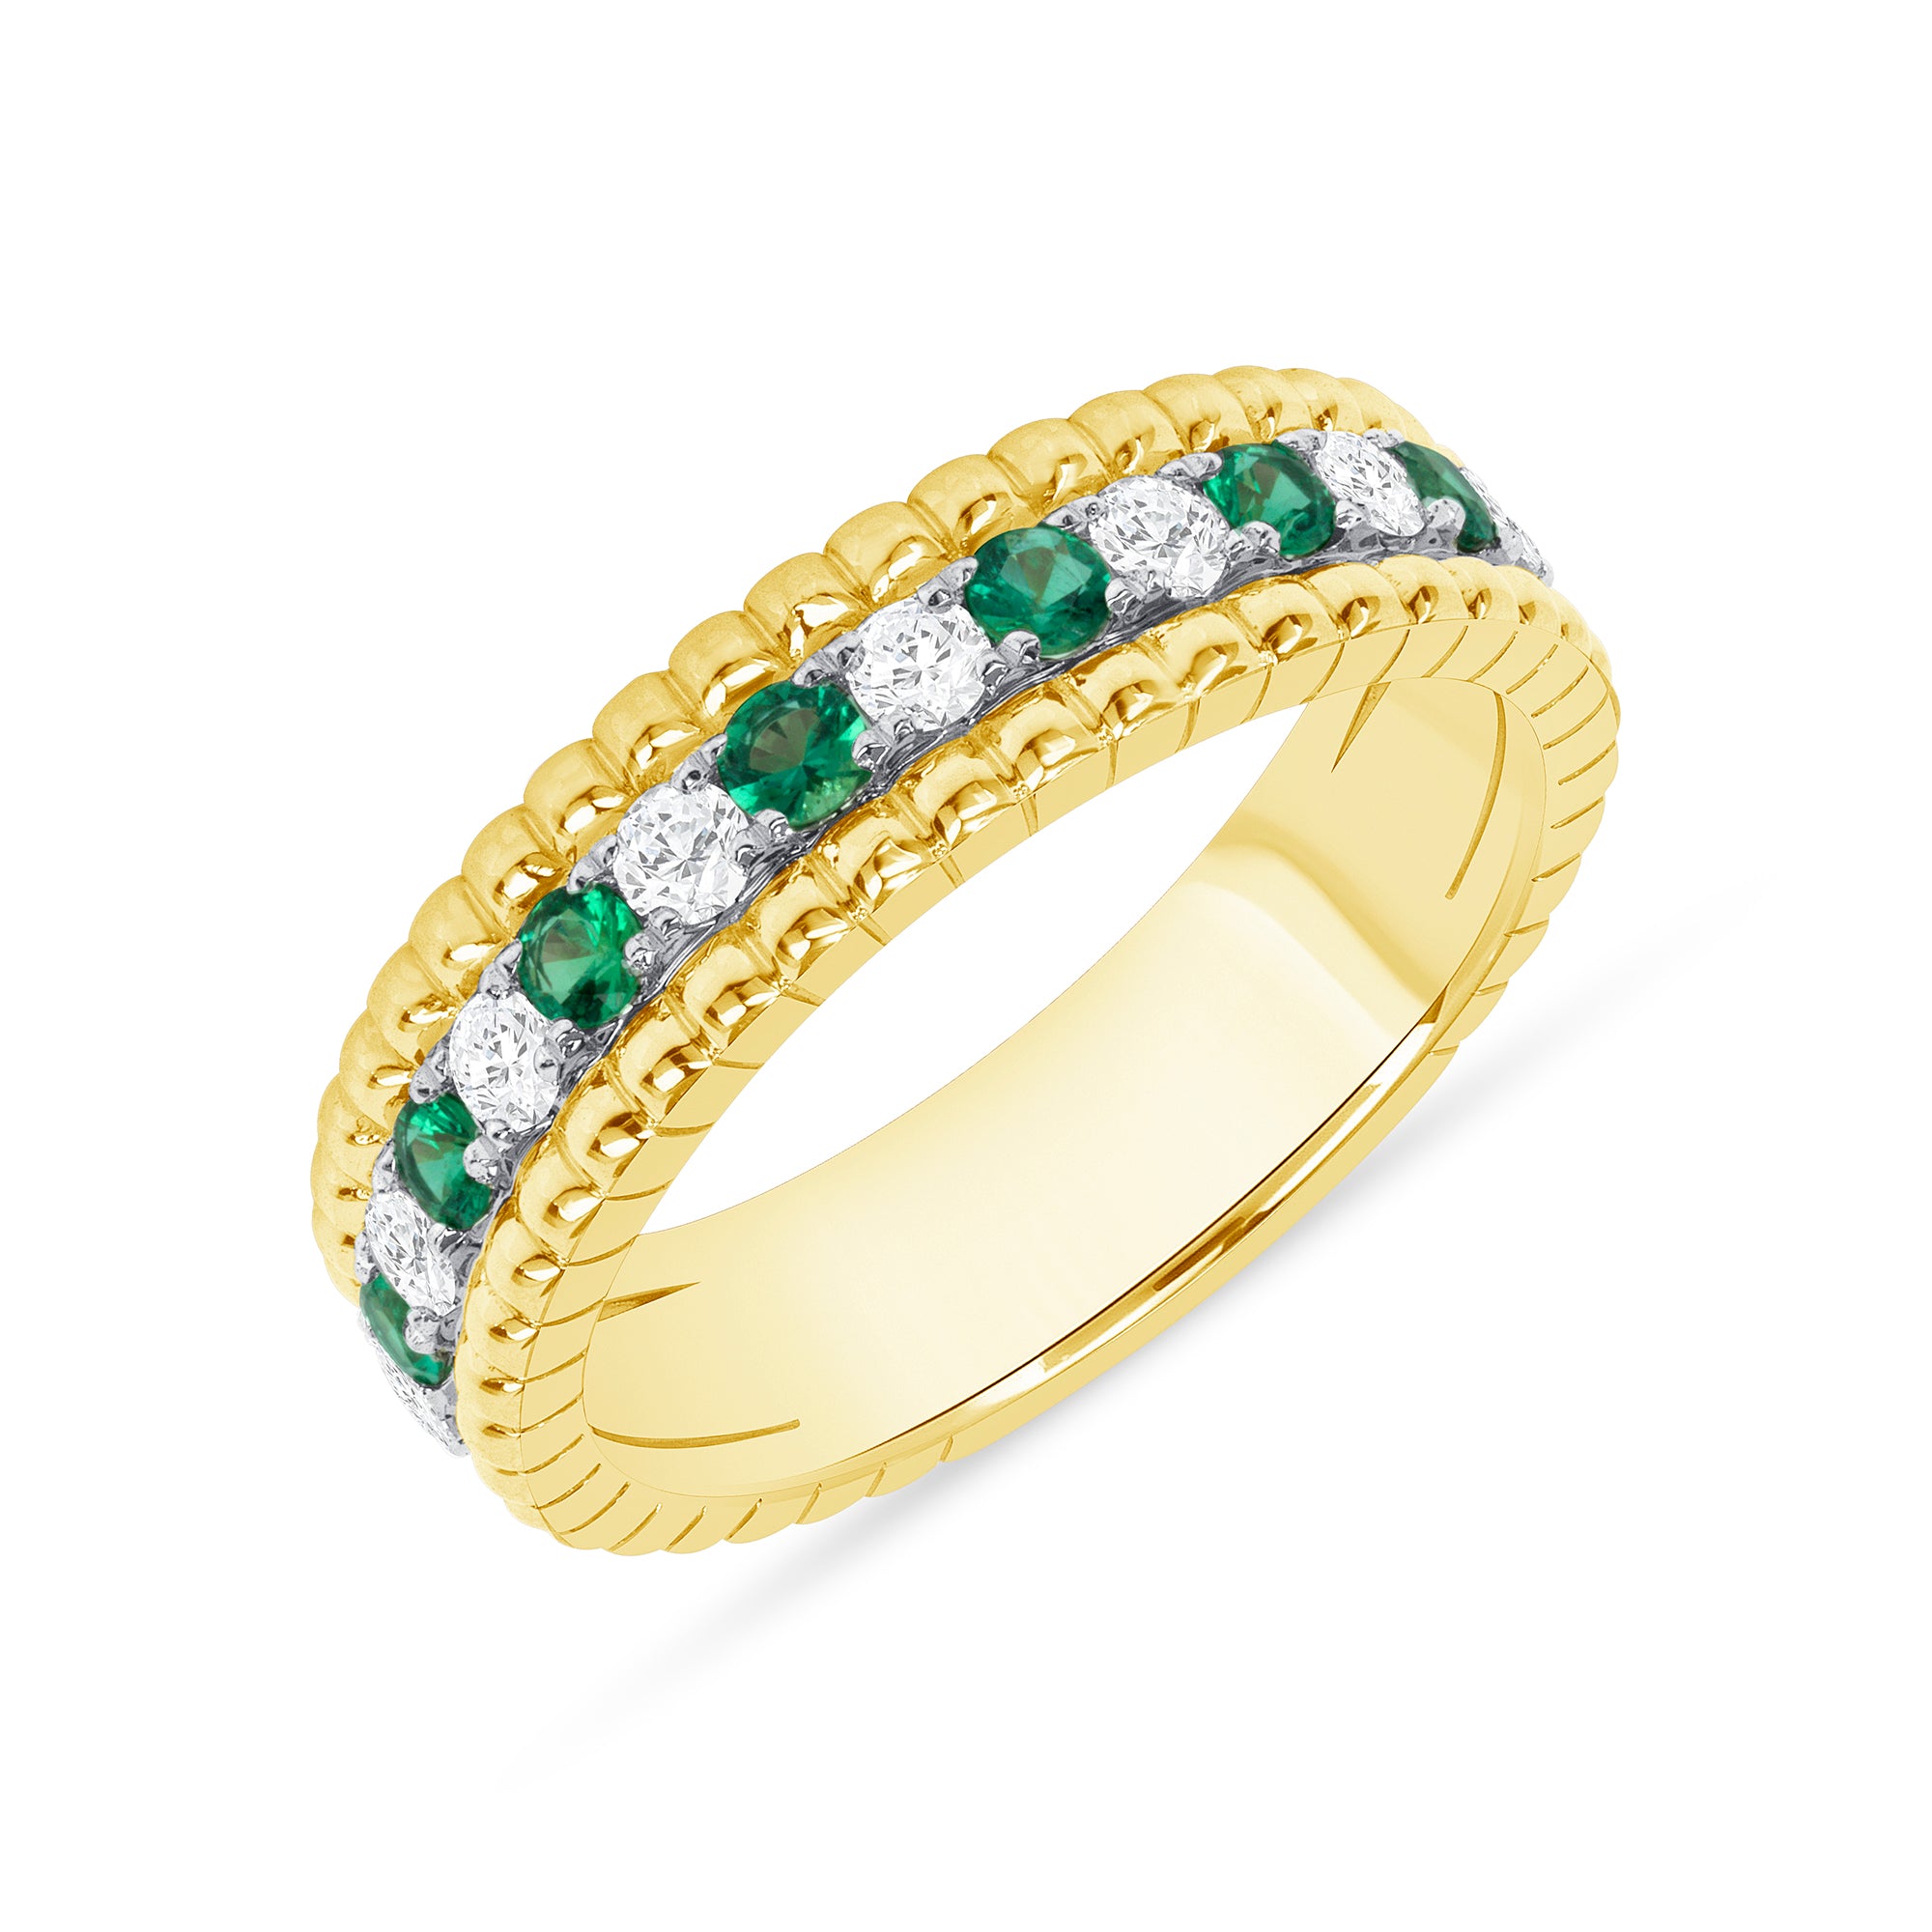 Alternating Round Brilliant Diamond and Emerald Band in 18K Yellow Gold